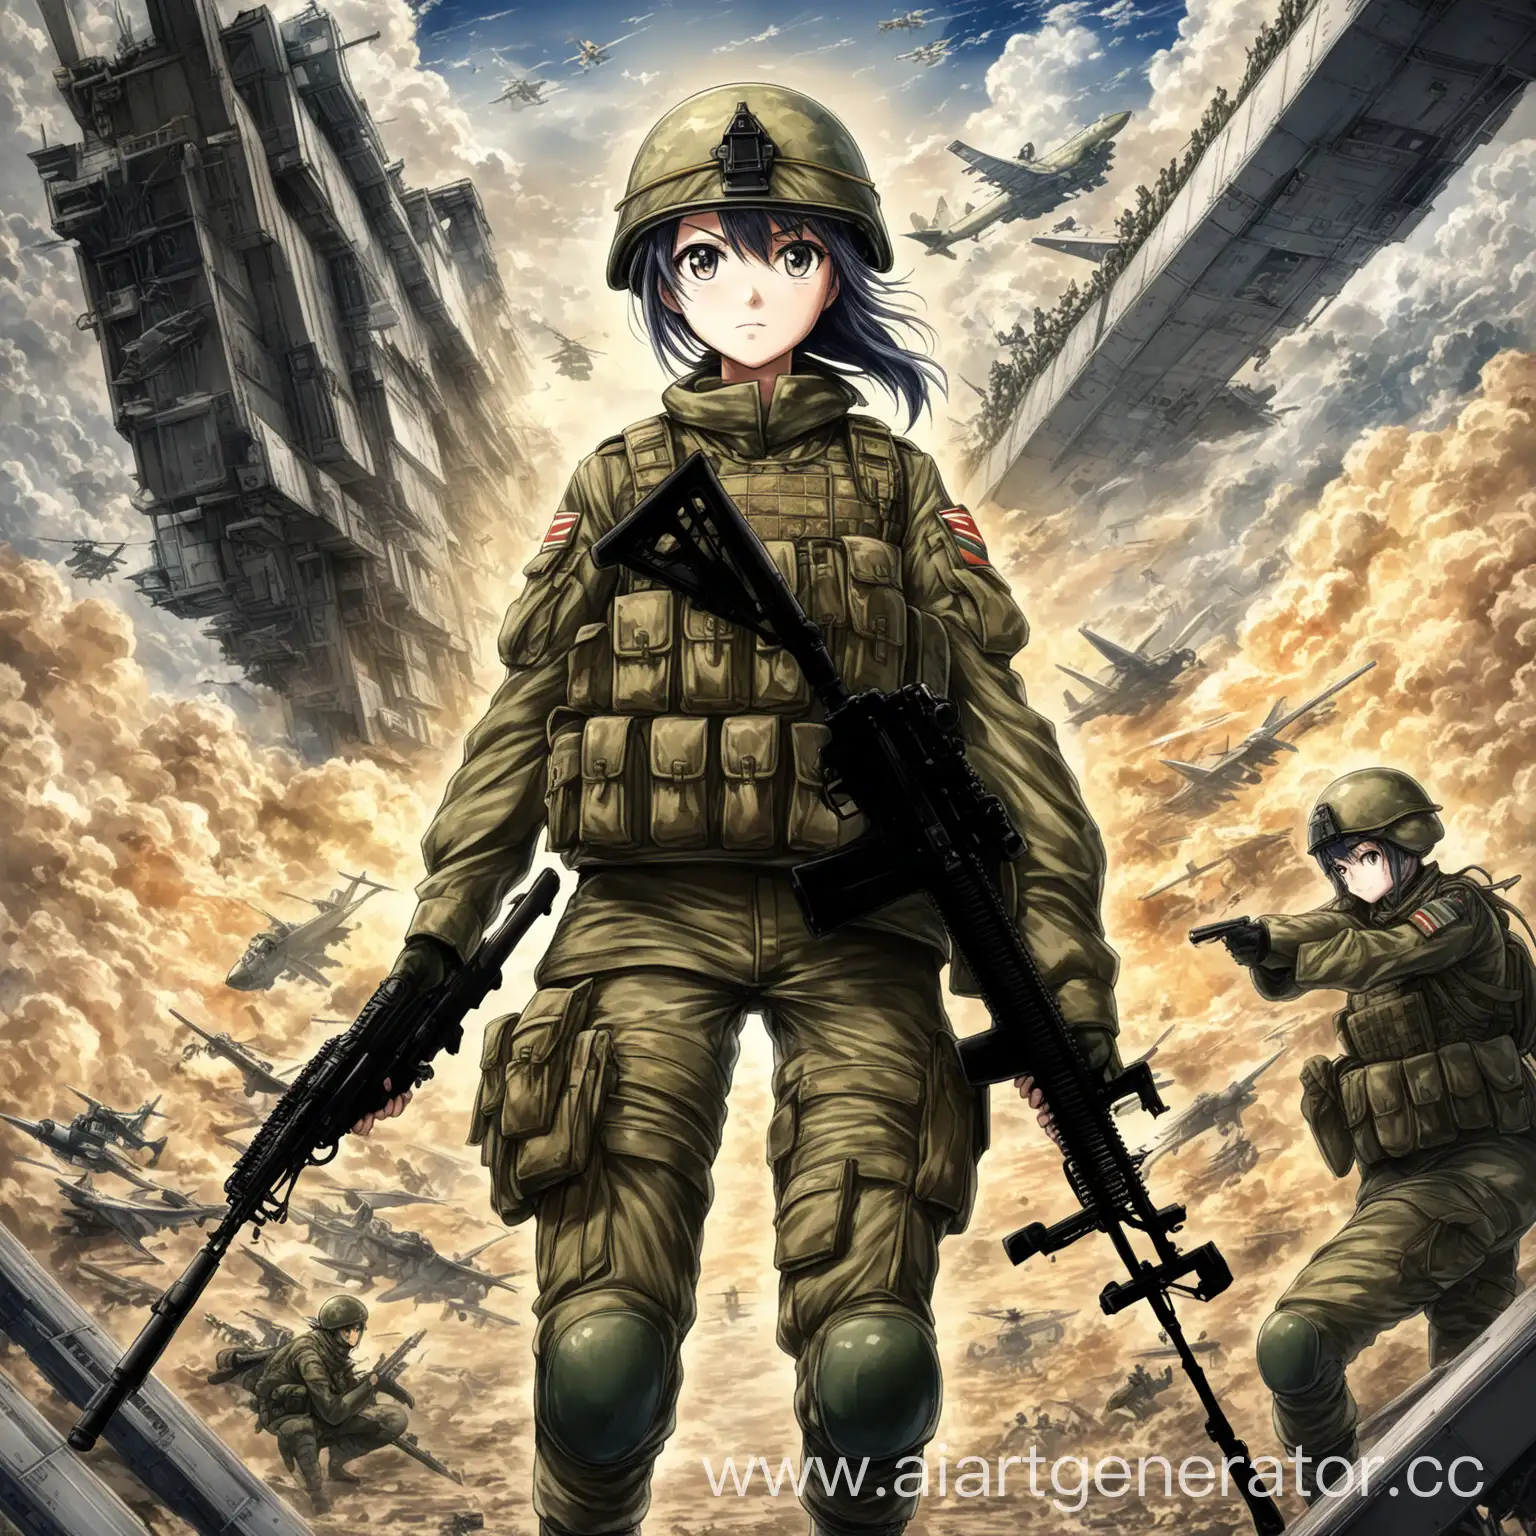 Anime-Art-Girl-Soldier-in-Central-Plane